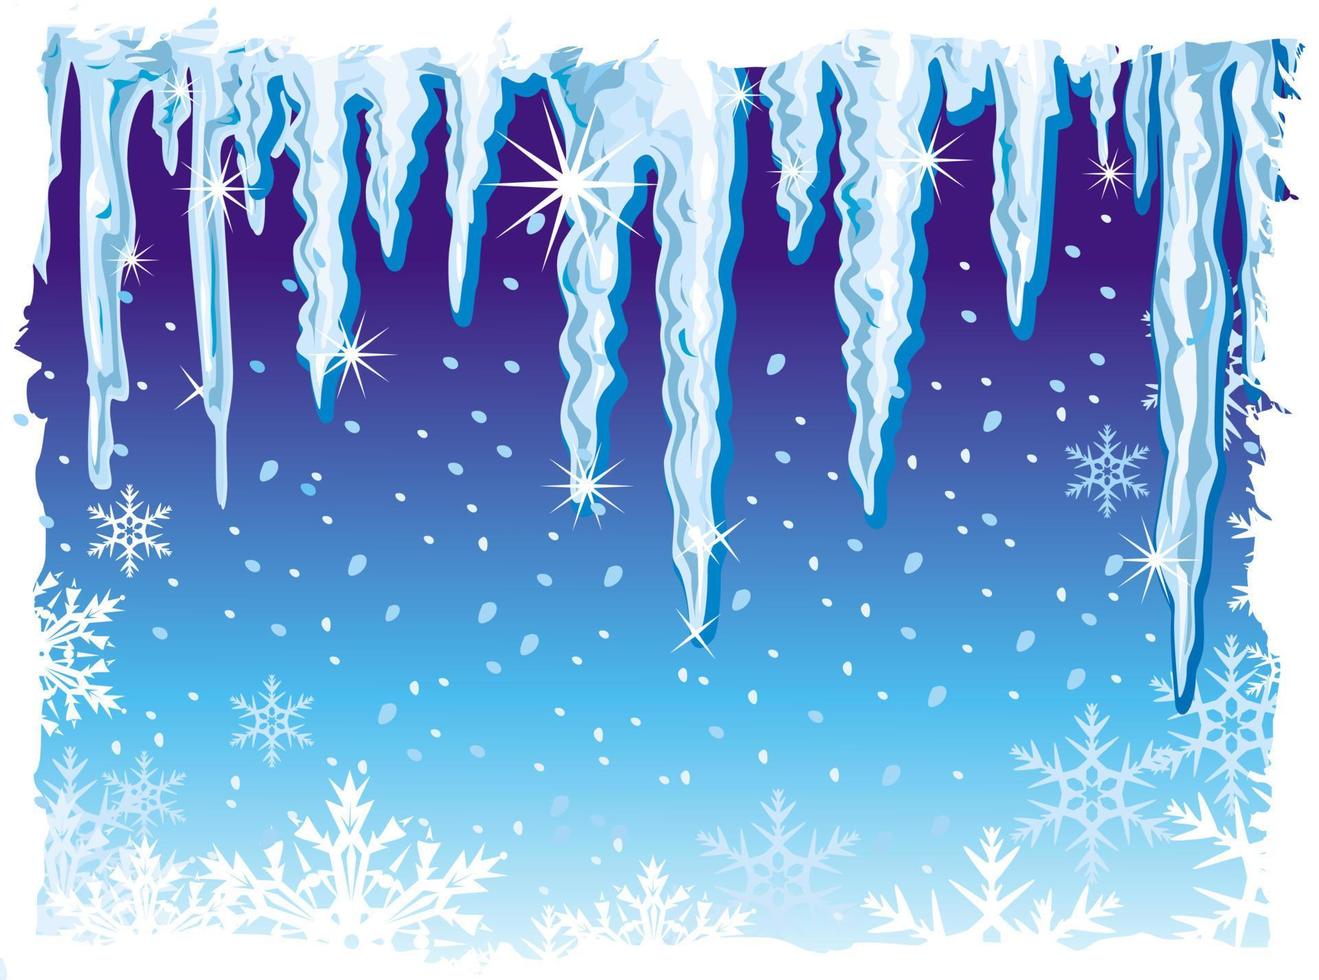 Background with icicle vector